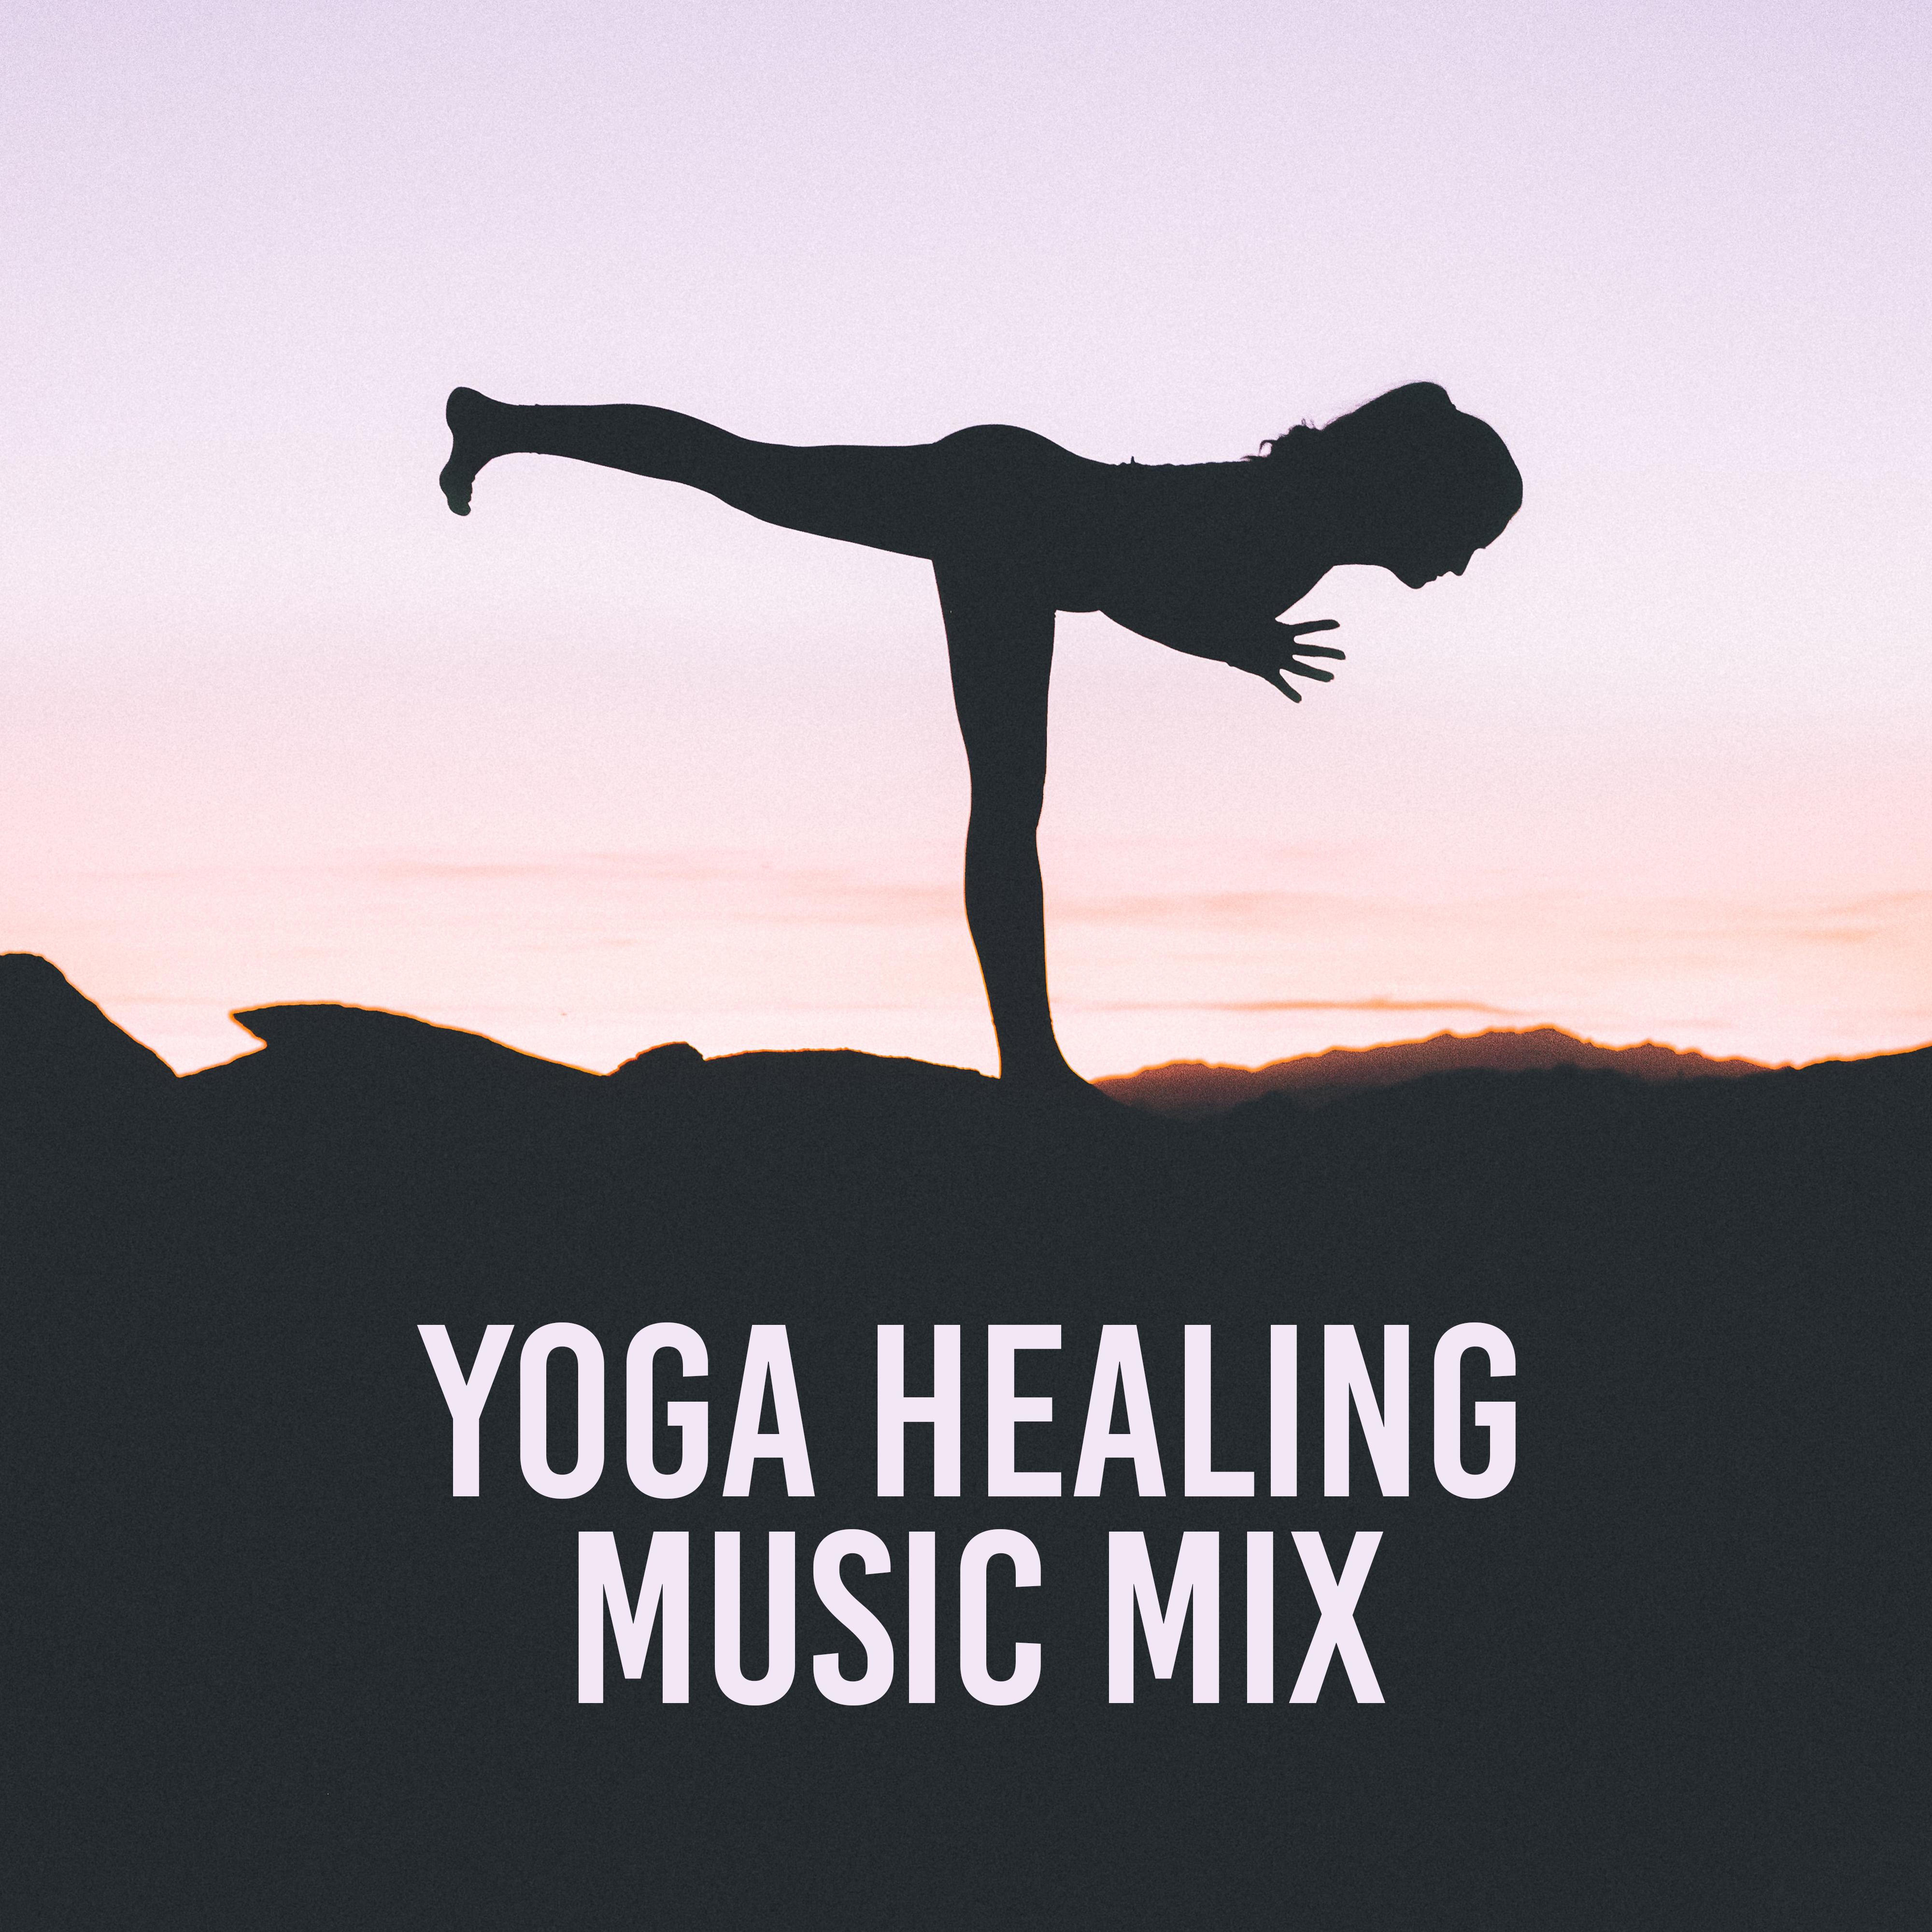 Yoga Healing Music Mix: 2019 New Age Ambient Music Compilation for Deep Contemplation, Meditation & Relaxing, Chakra Healing, Increase Life Energy, Zen